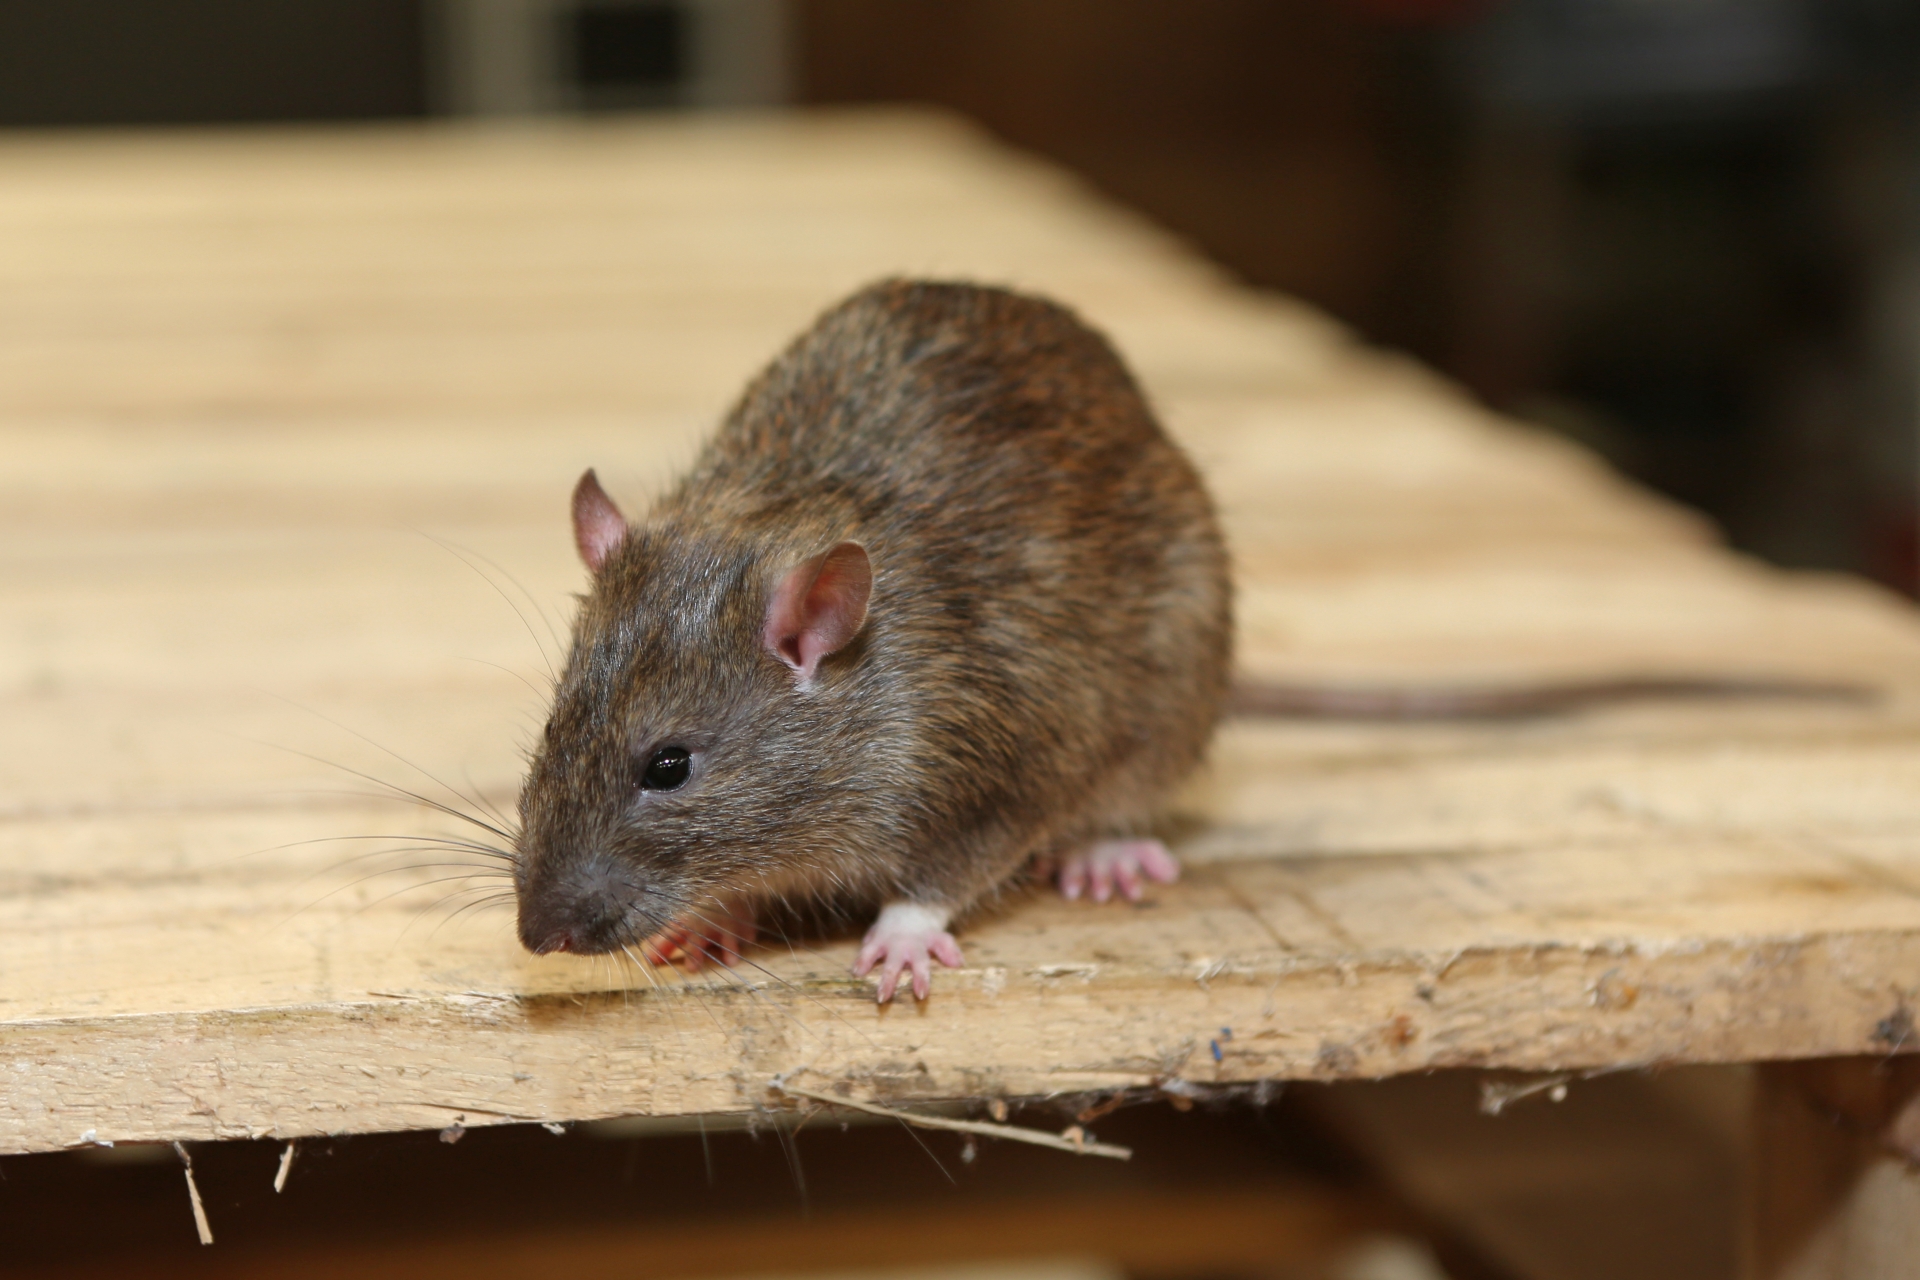 Rat extermination, Pest Control in Golders Green, Hampstead Garden Suburb, NW11. Call Now 020 8166 9746